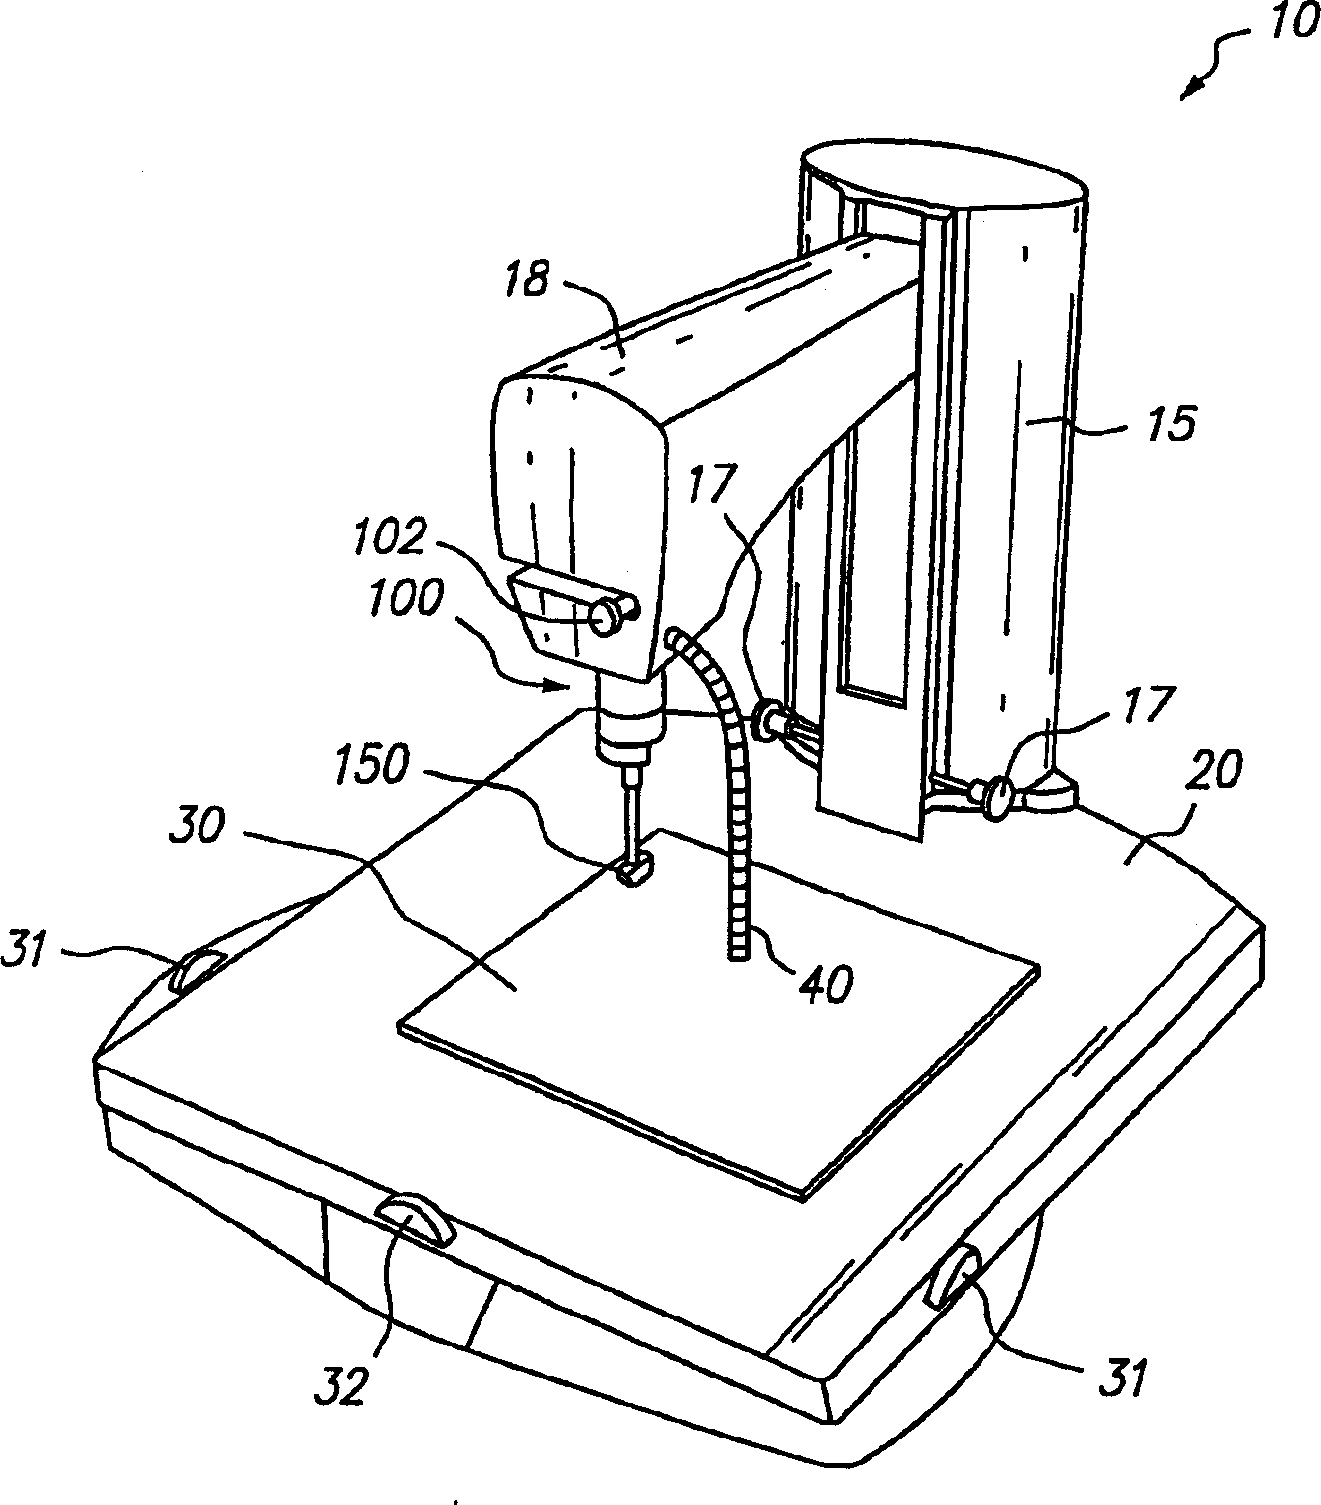 Device and methods for inspecting soldered connections